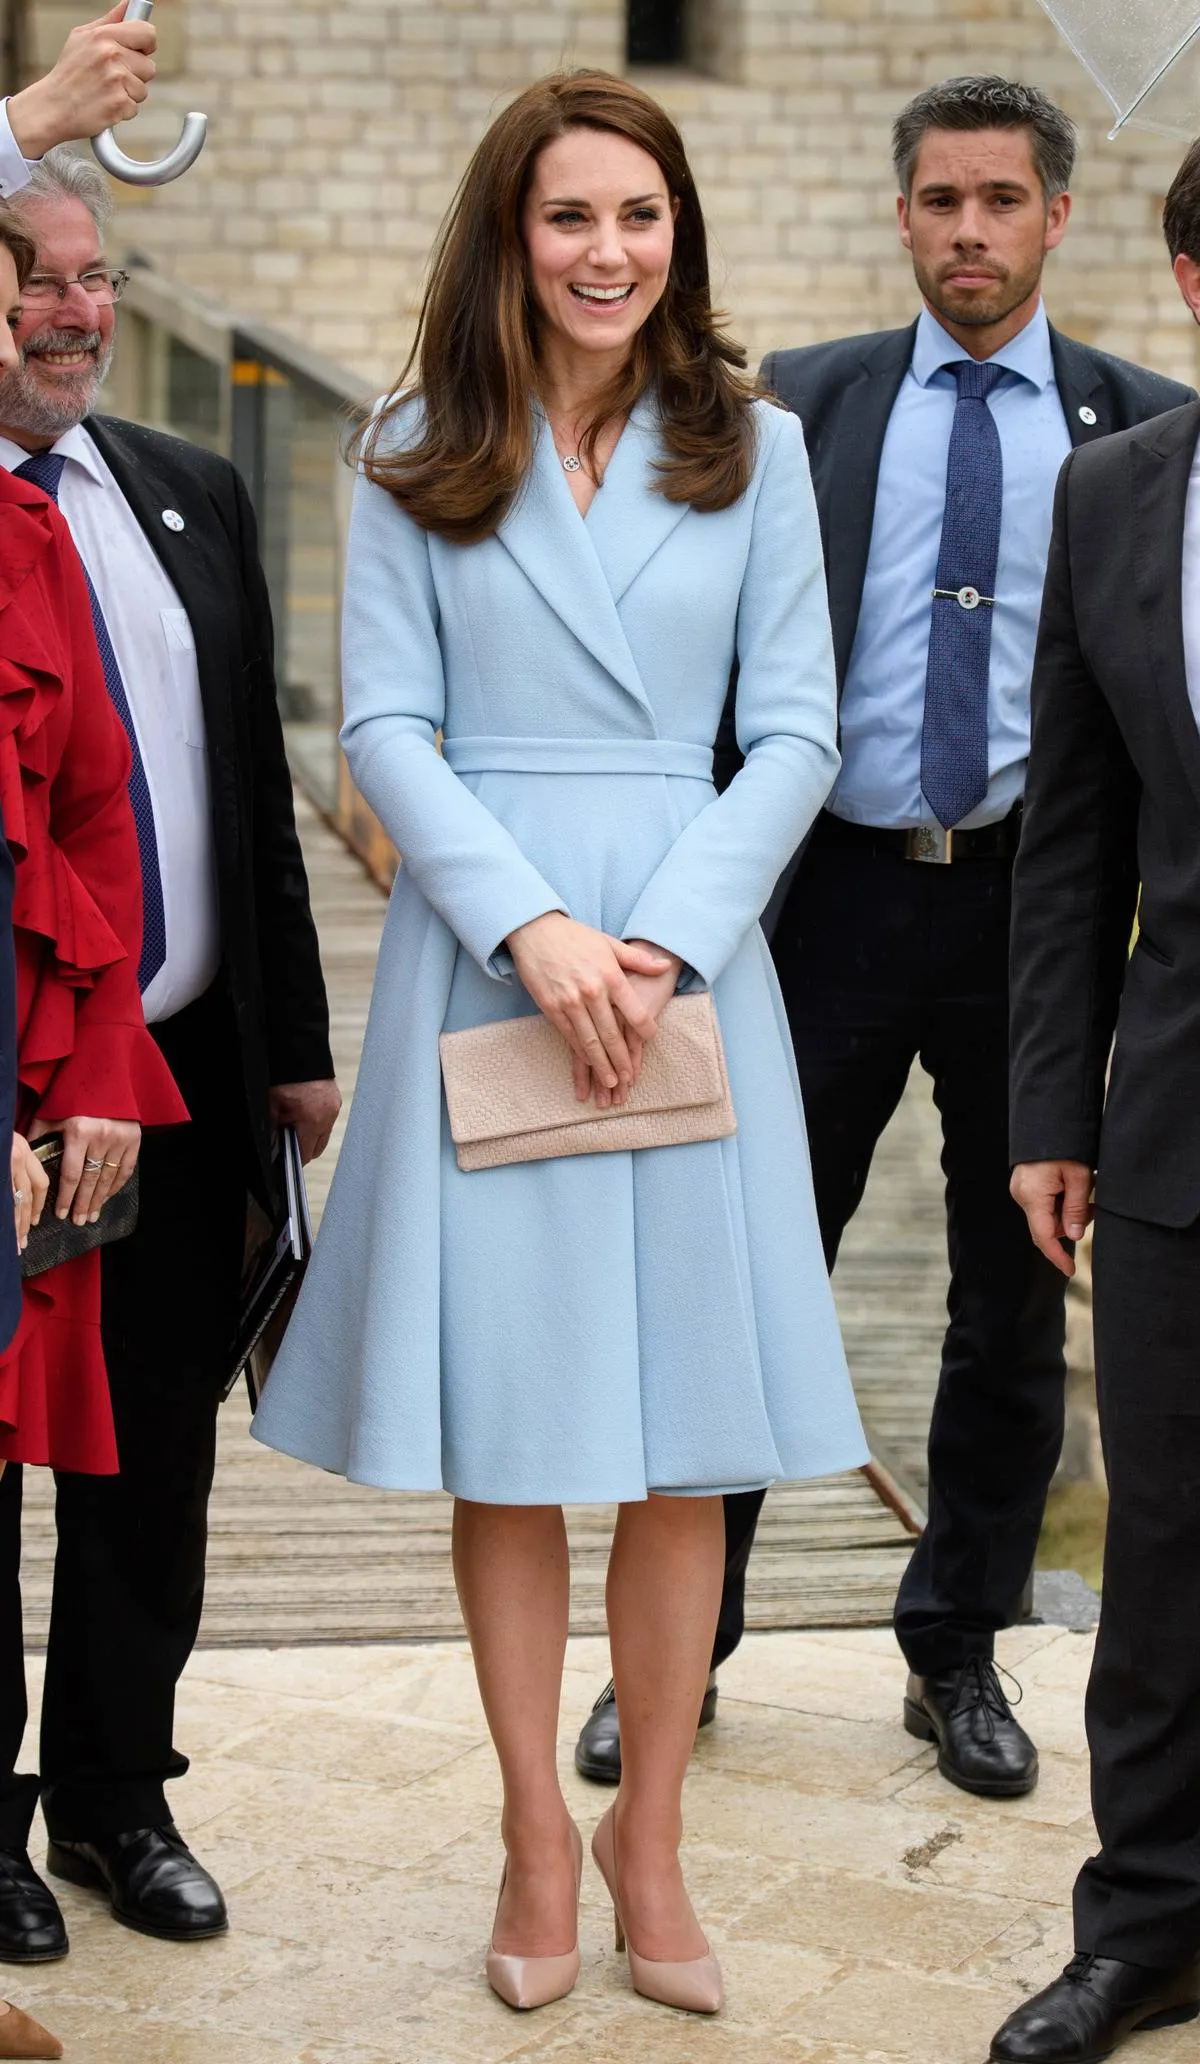 The Duchess Of Cambridge wears a baby blue dress to a museum visit.